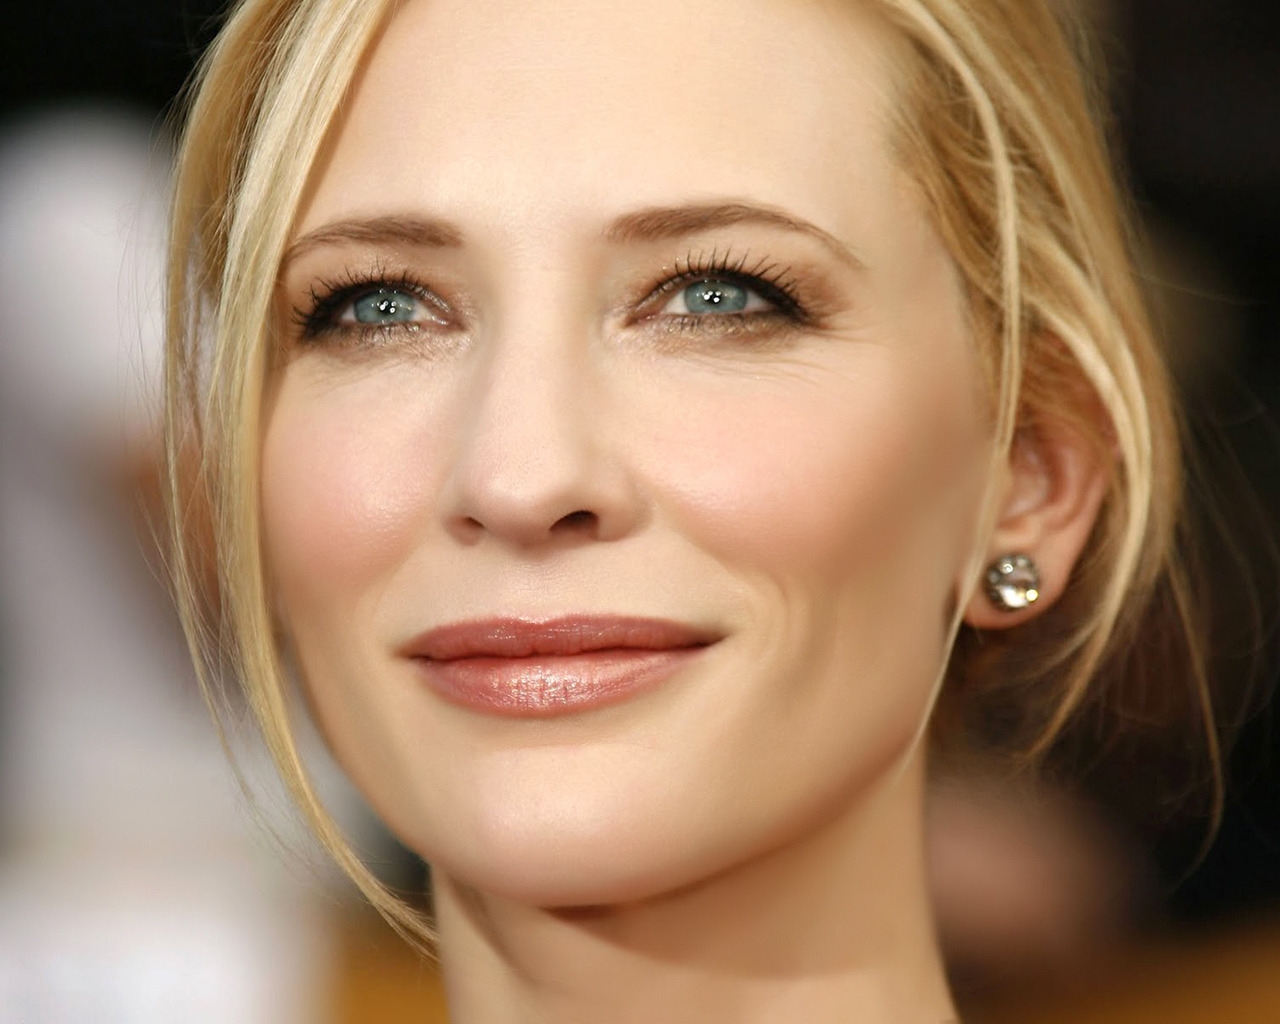 Cate Blanchett Look for 1280 x 1024 resolution